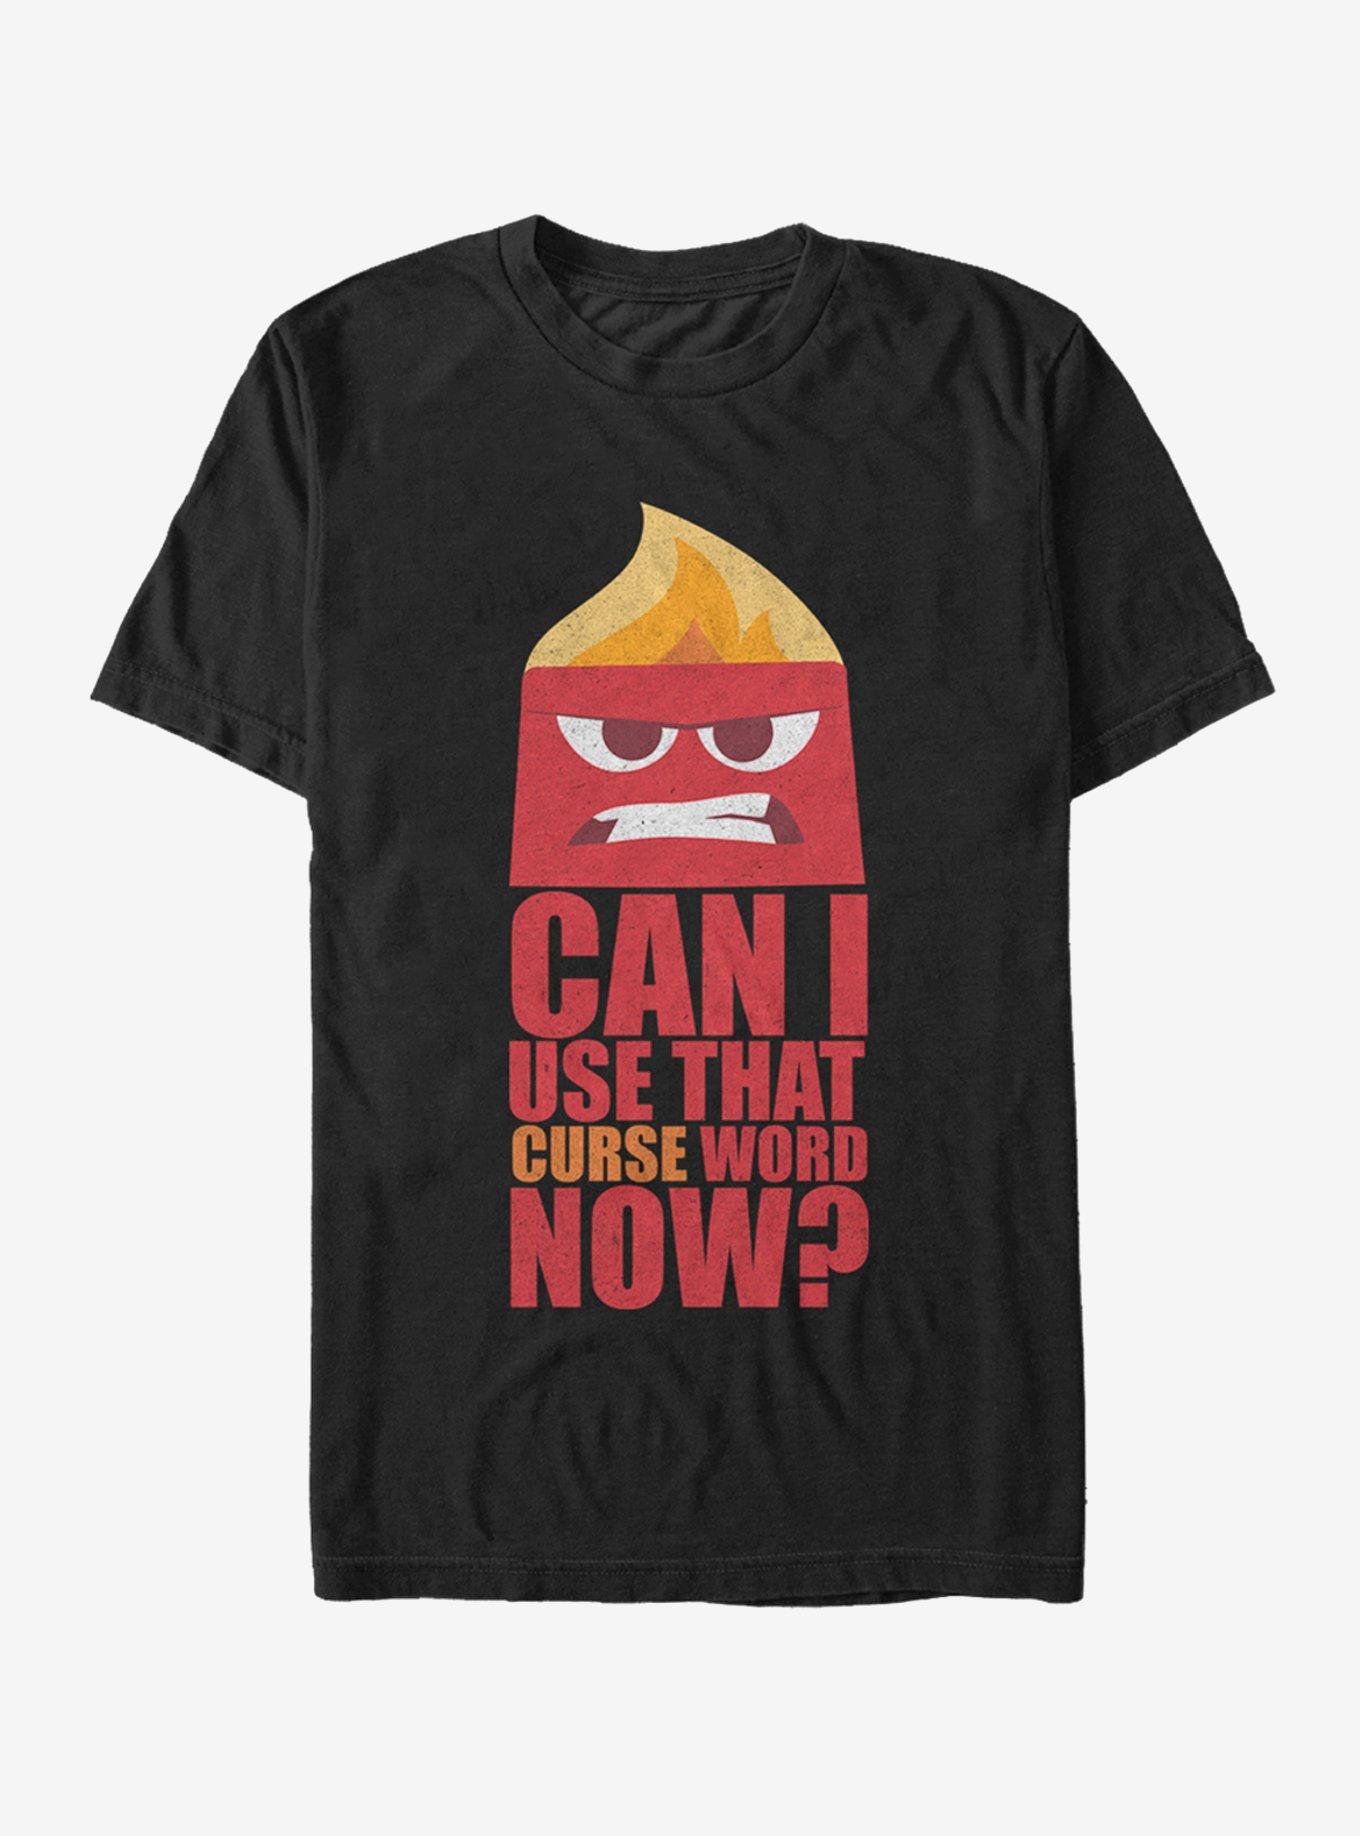 Disney Pixar Inside Out Anger Can I Use That Curse Word Now T-Shirt